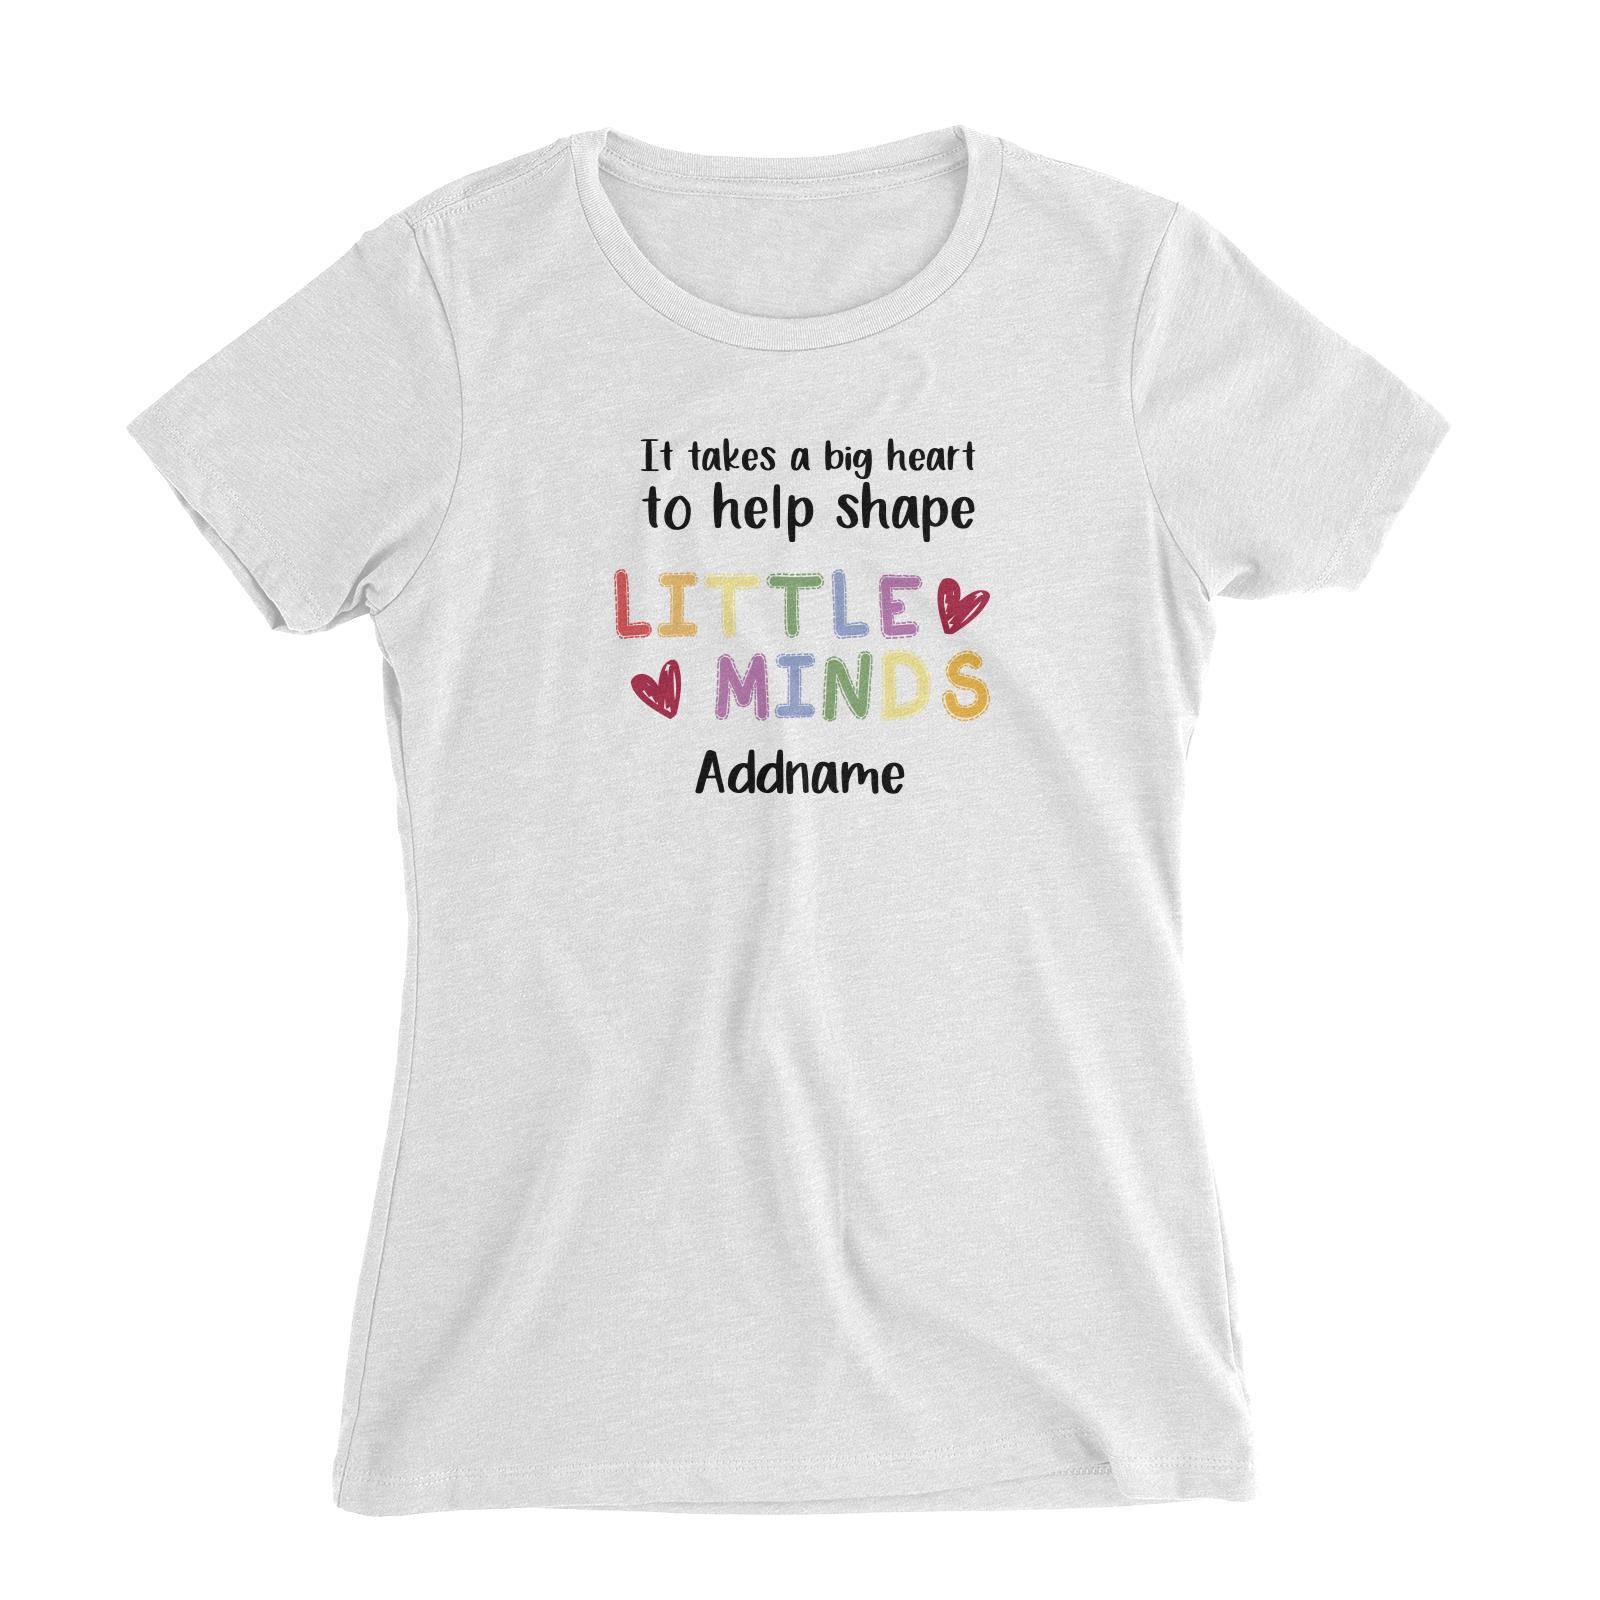 Teacher Quotes 2 It Takes A Big Heart To Help Shape Little Minds Addname Women's Slim Fit T-Shirt